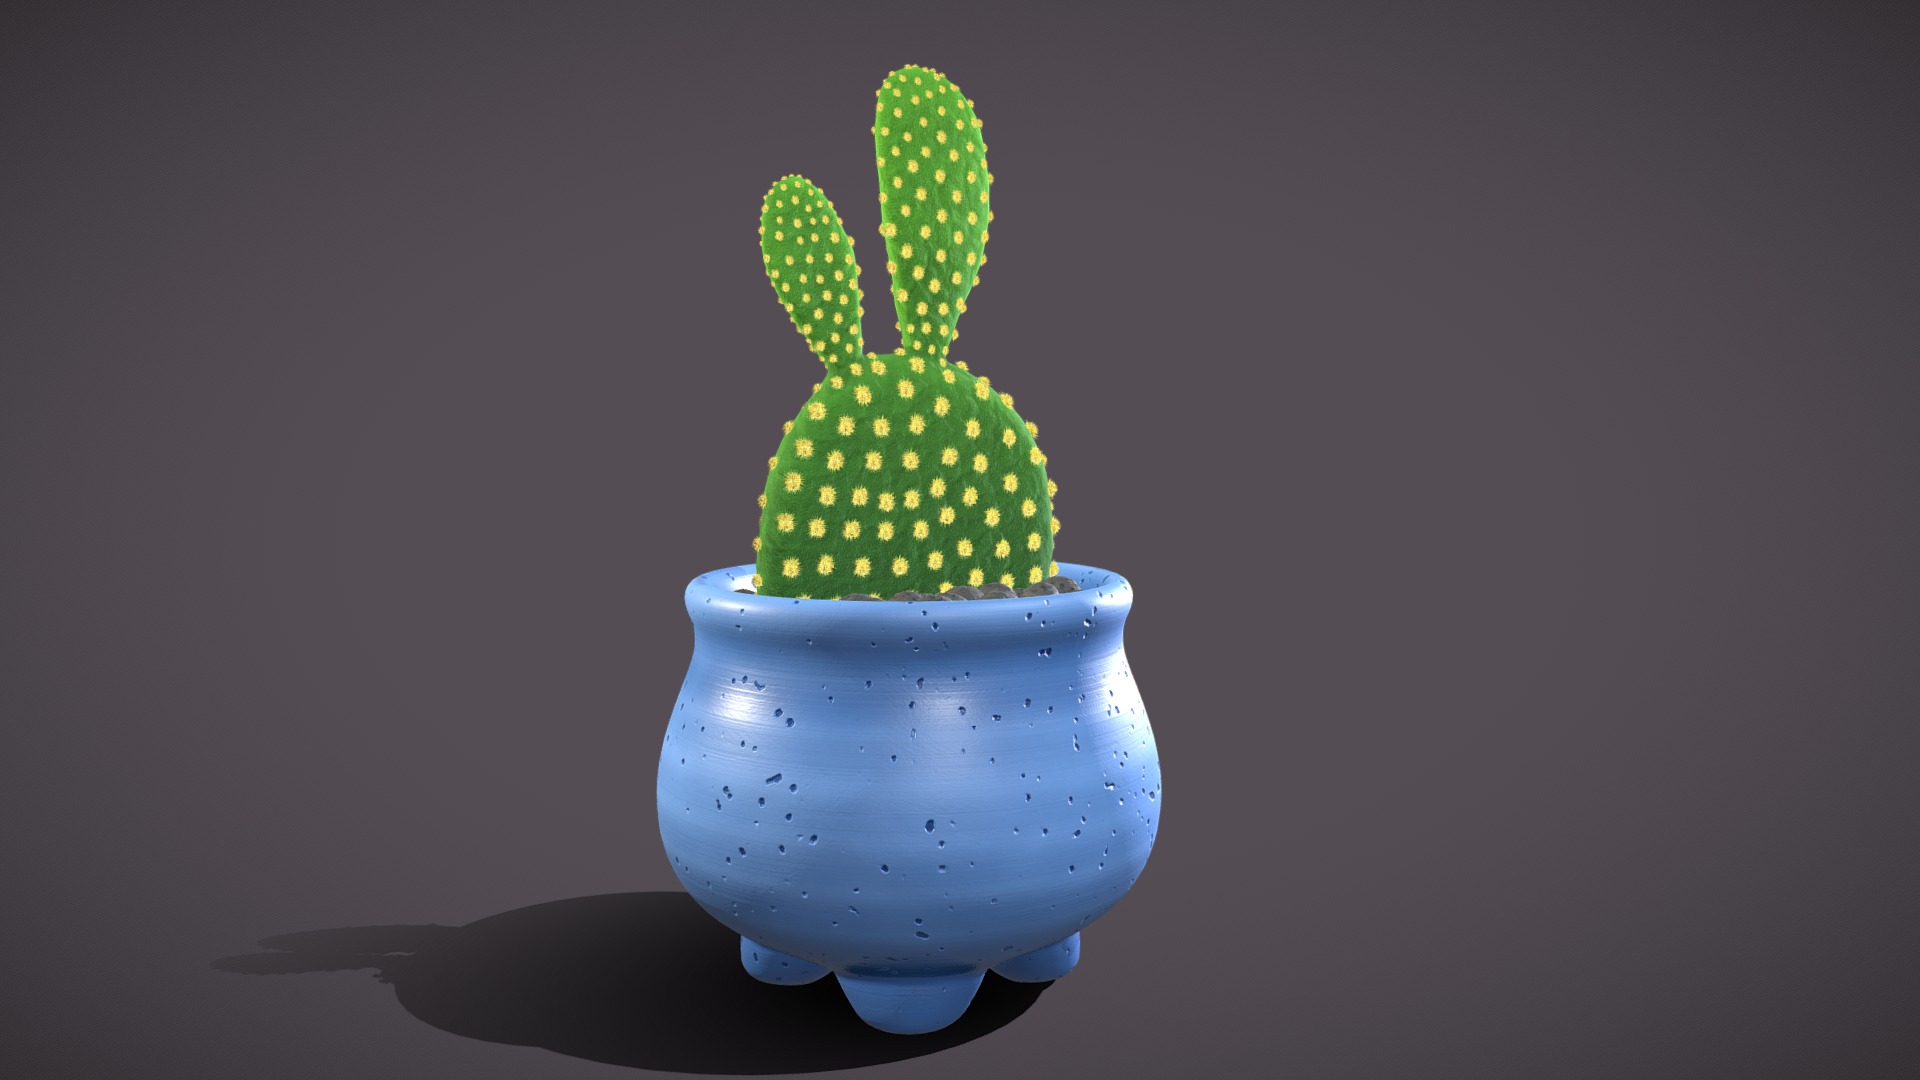 3D model Cactus 04 - This is a 3D model of the Cactus 04. The 3D model is about a blue and green ceramic vase.